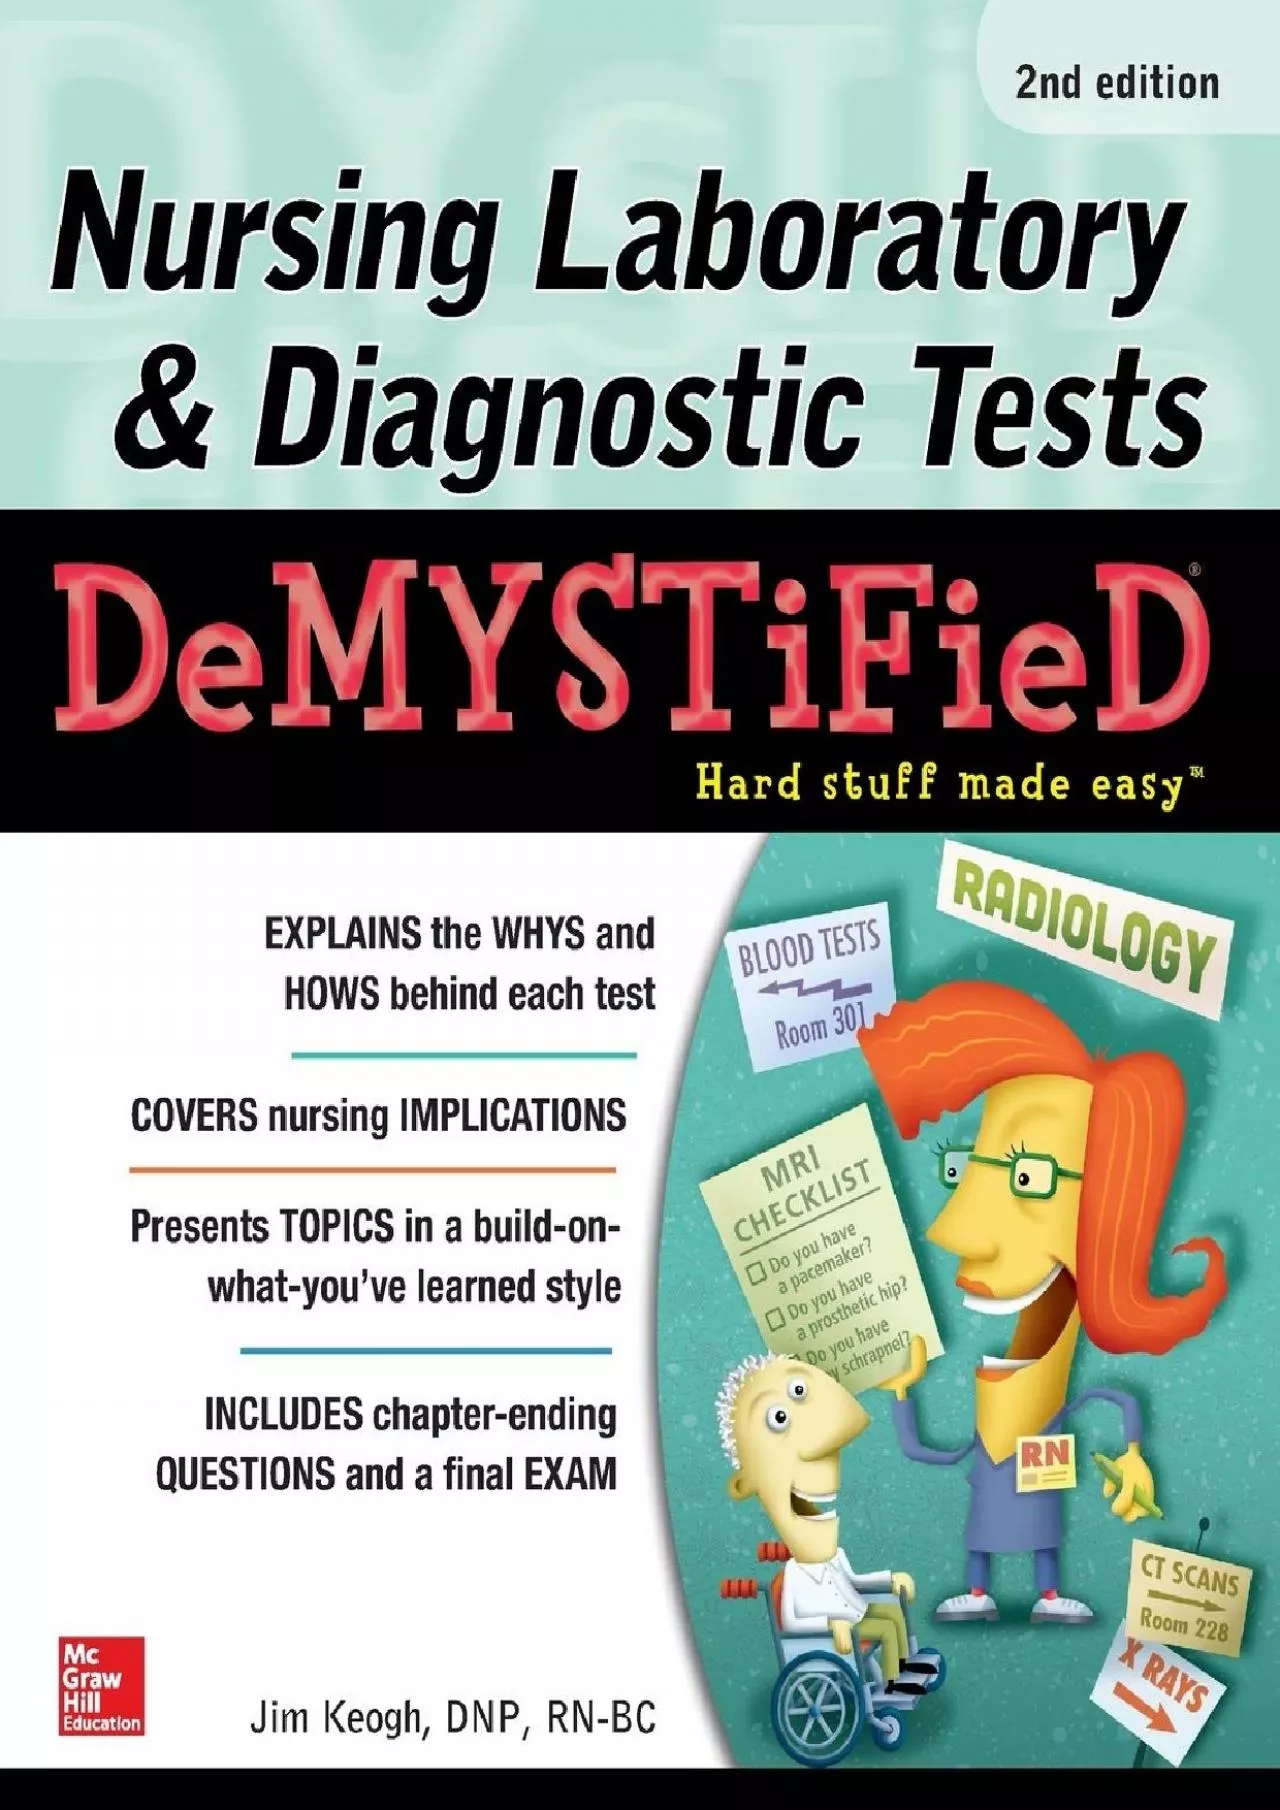 (BOOK)-Nursing Laboratory & Diagnostic Tests Demystified, Second Edition